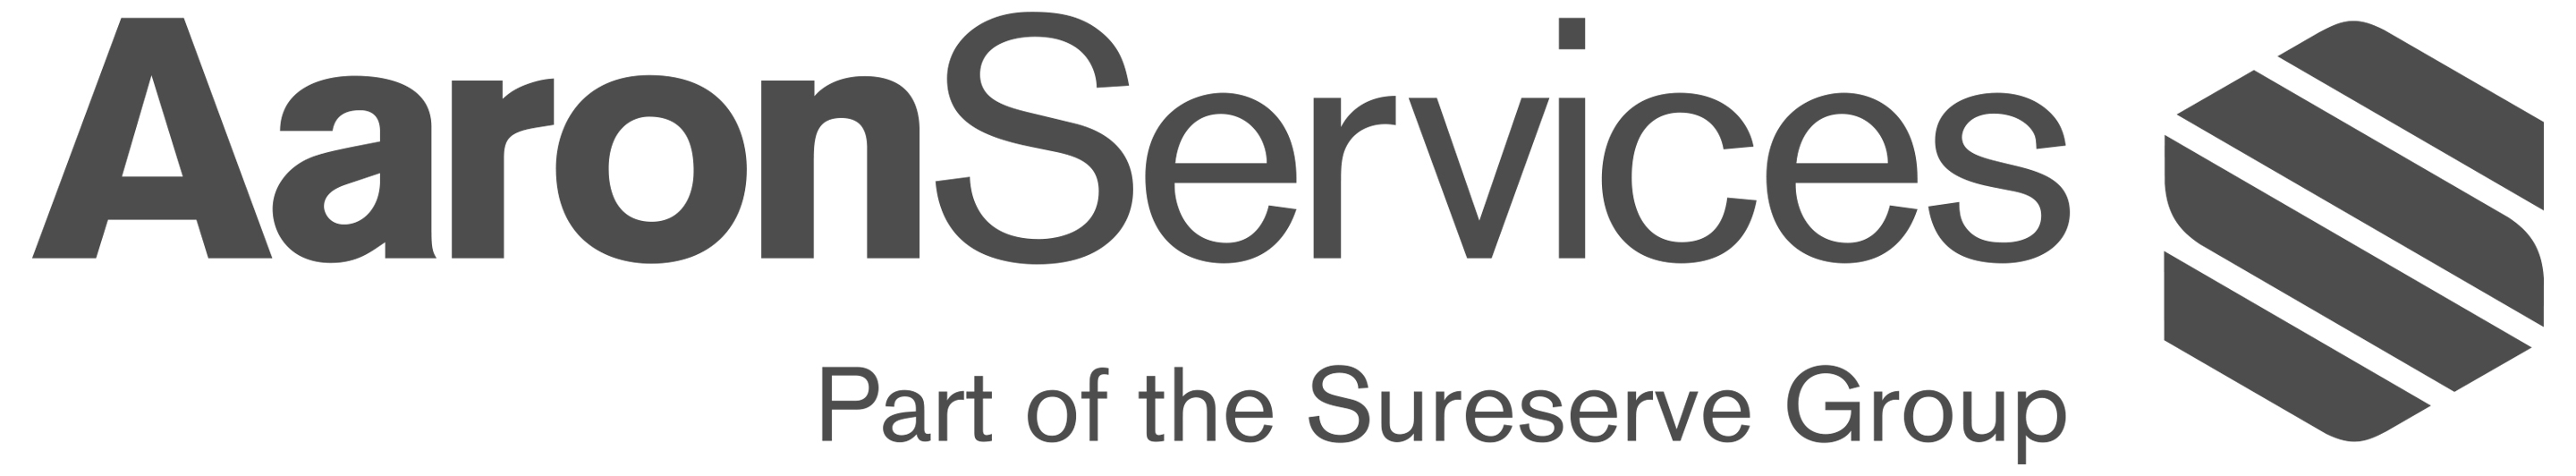 logo for Aaron Services Limited